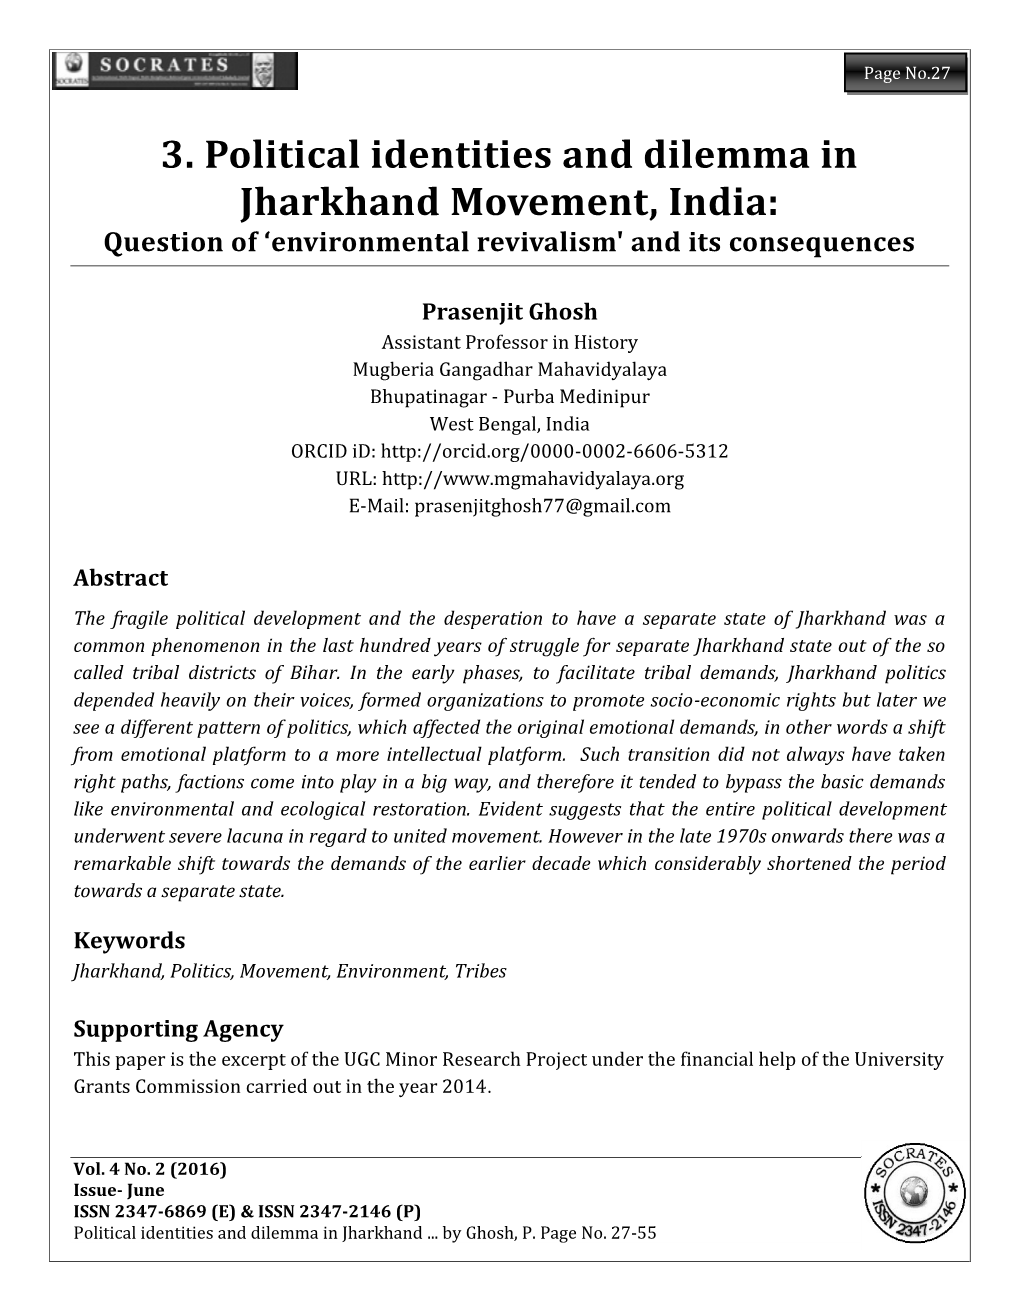 3. Political Identities and Dilemm Jharkhand Movement, India